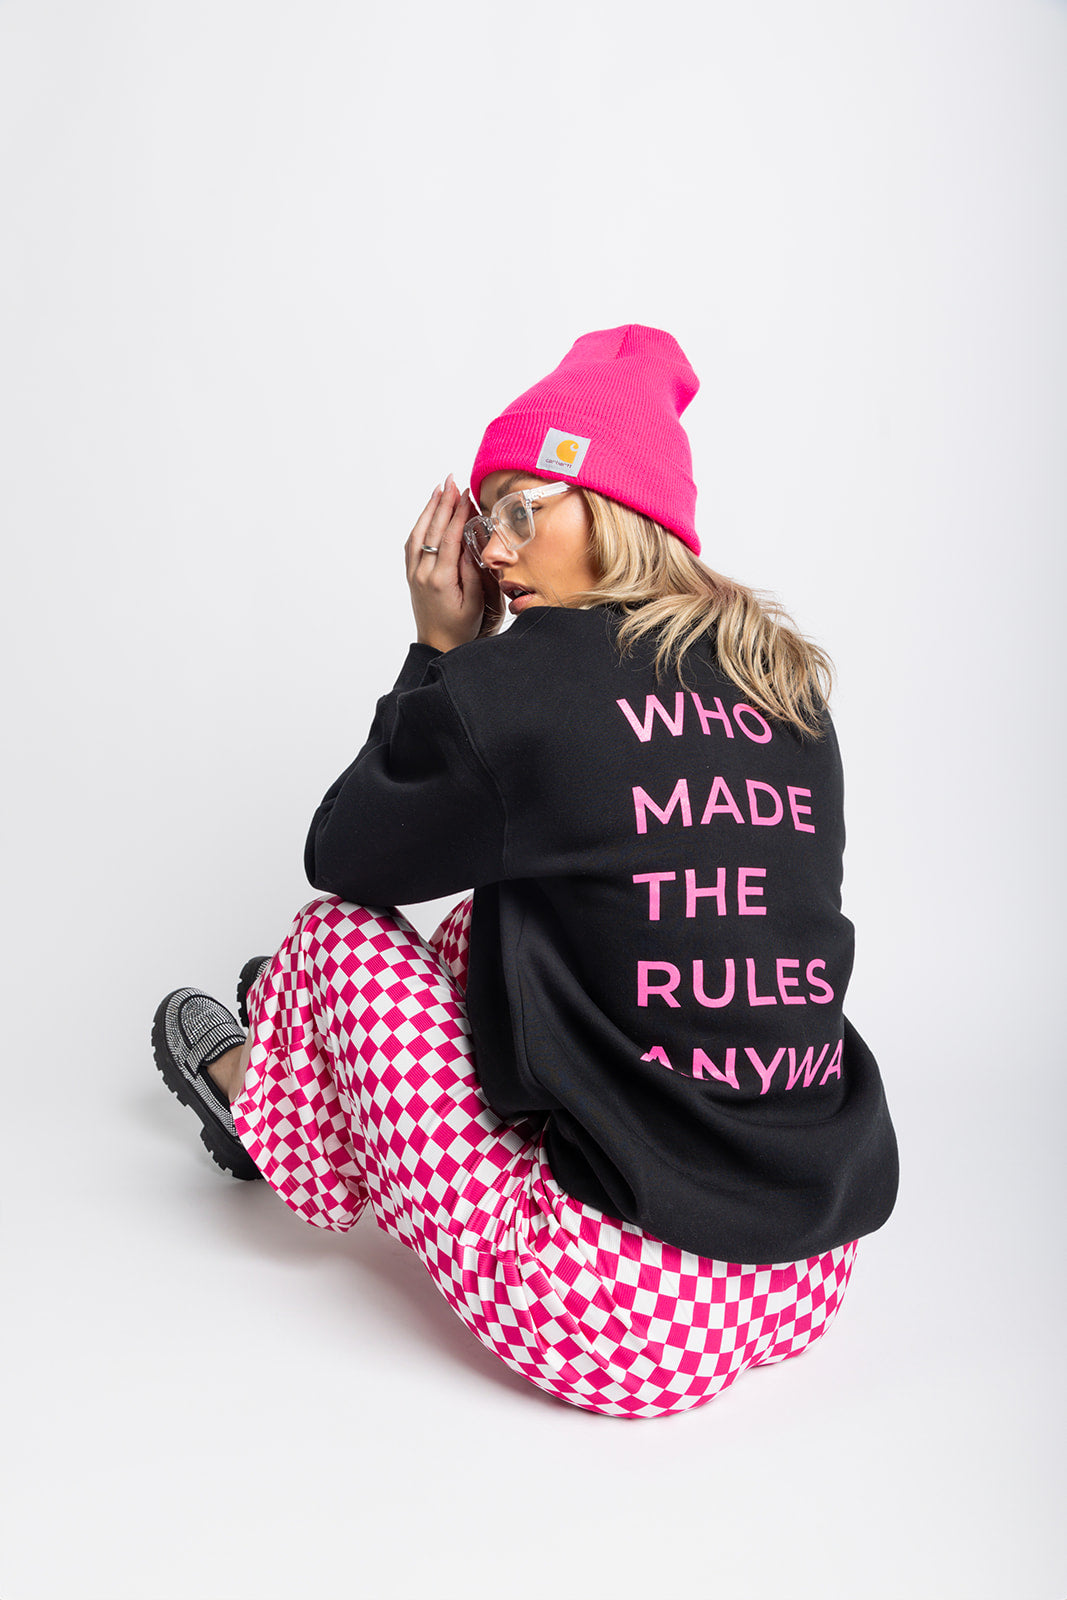 Bend the Rules Crewneck - Pink [S-3X]